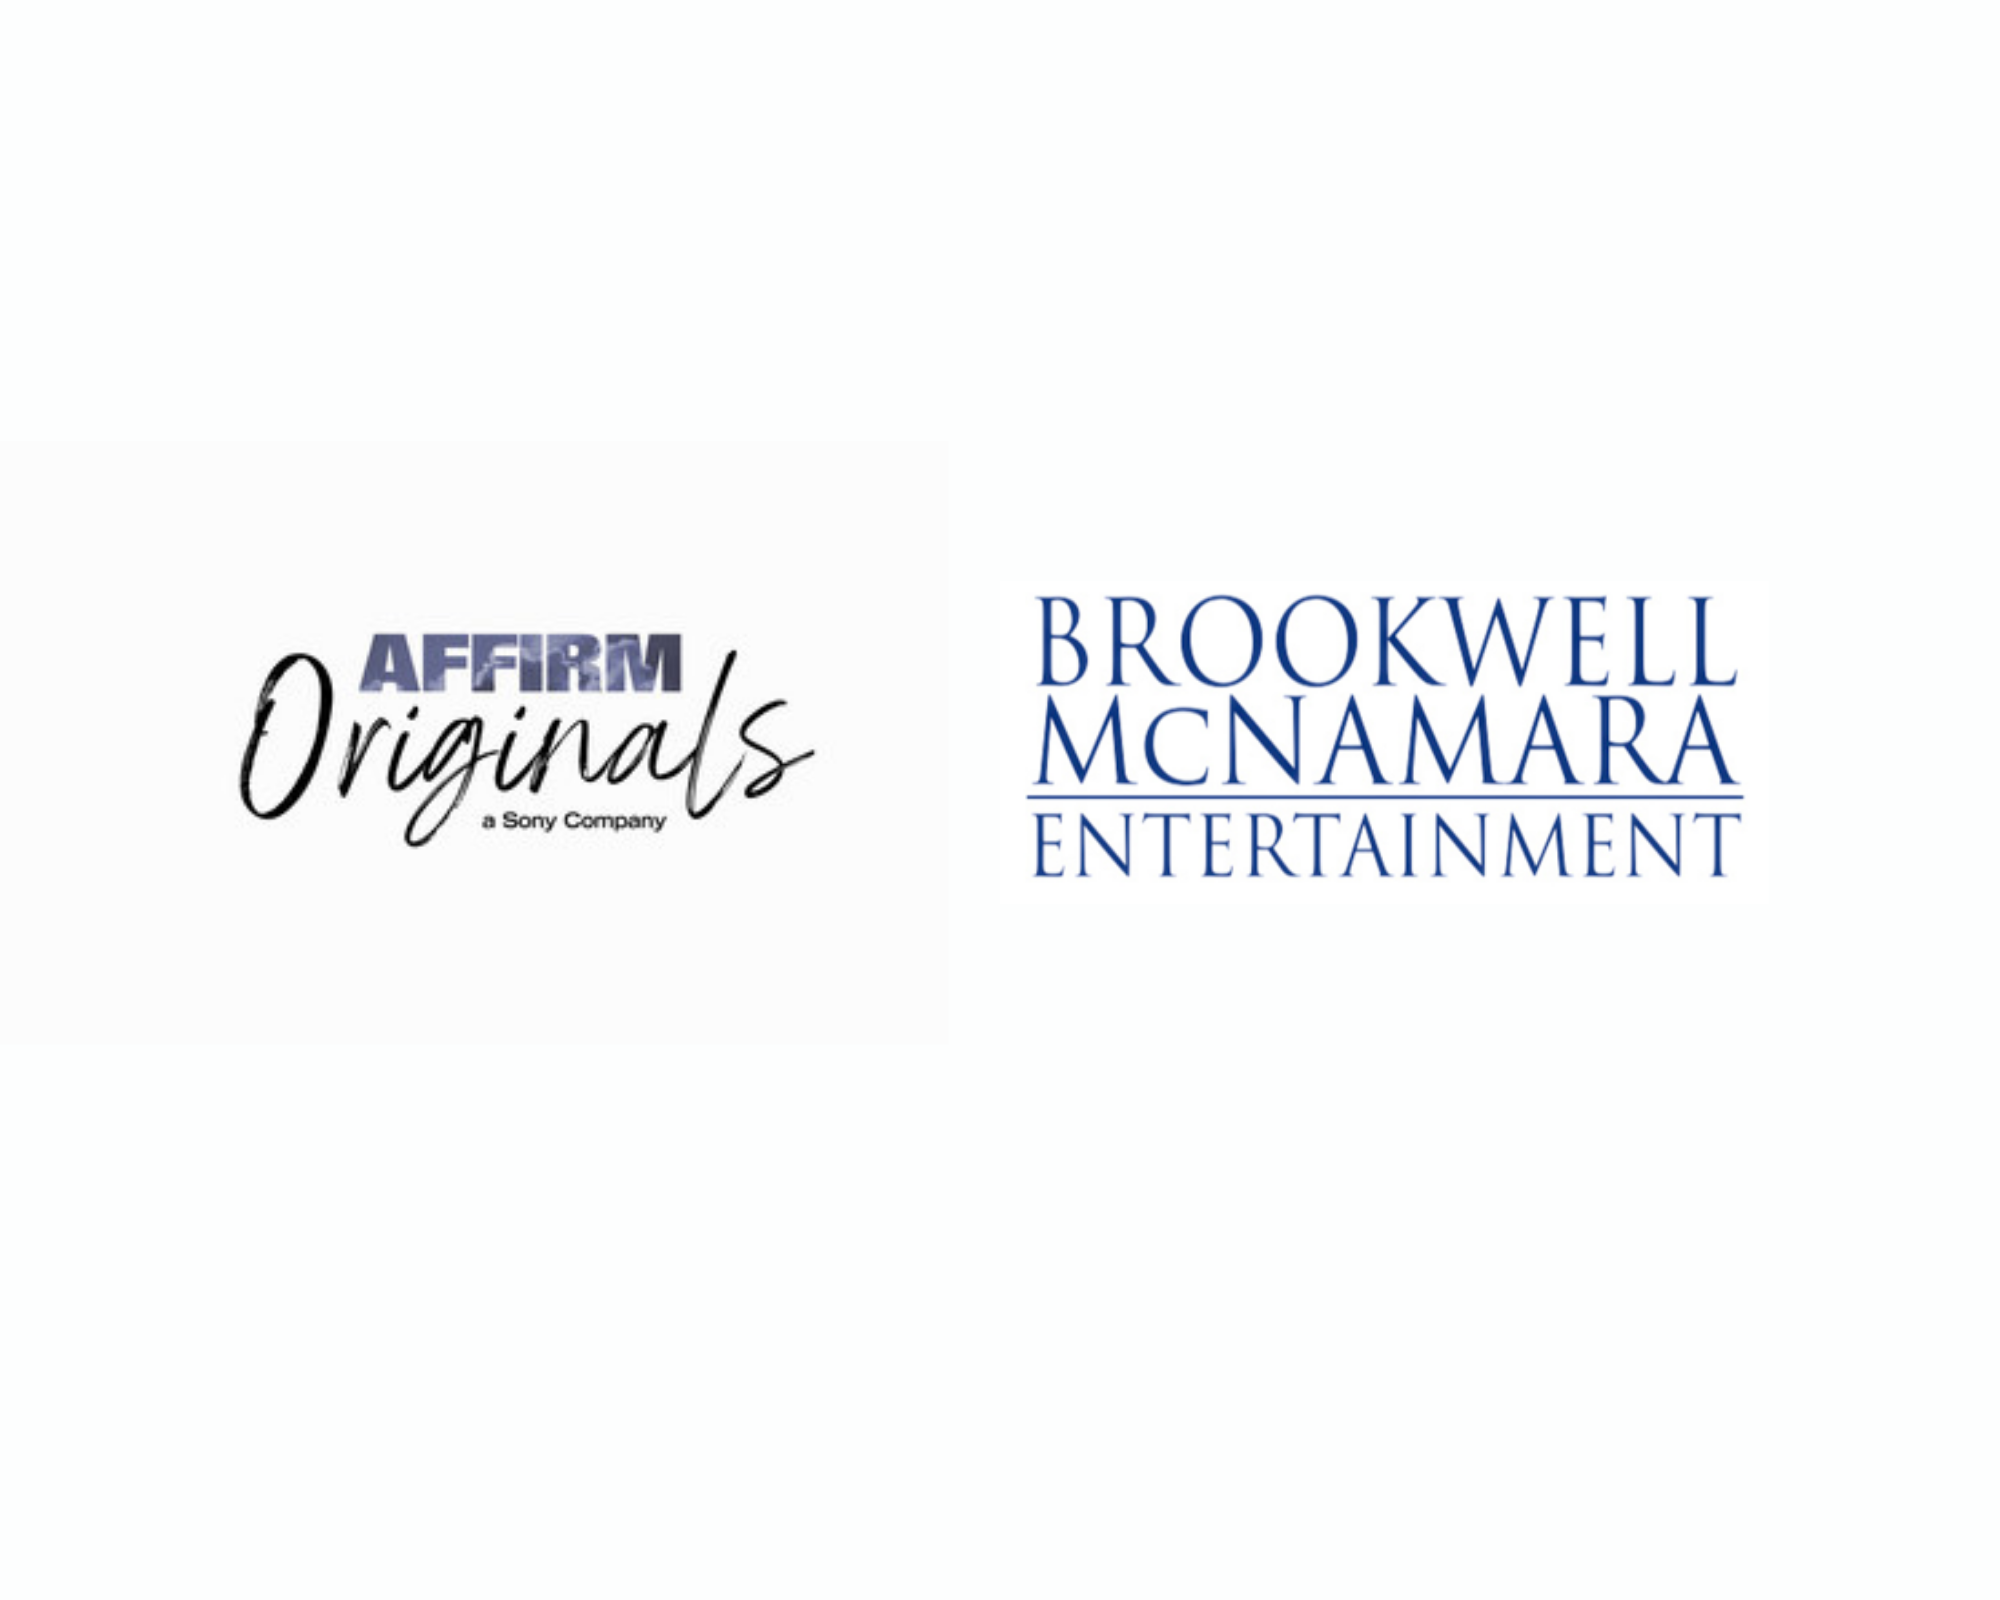 Shadrach: Brookwell McNamara Entertainment Partner with Affirm Originals for an Original Series on Sony’s Pure Flix Streaming Service